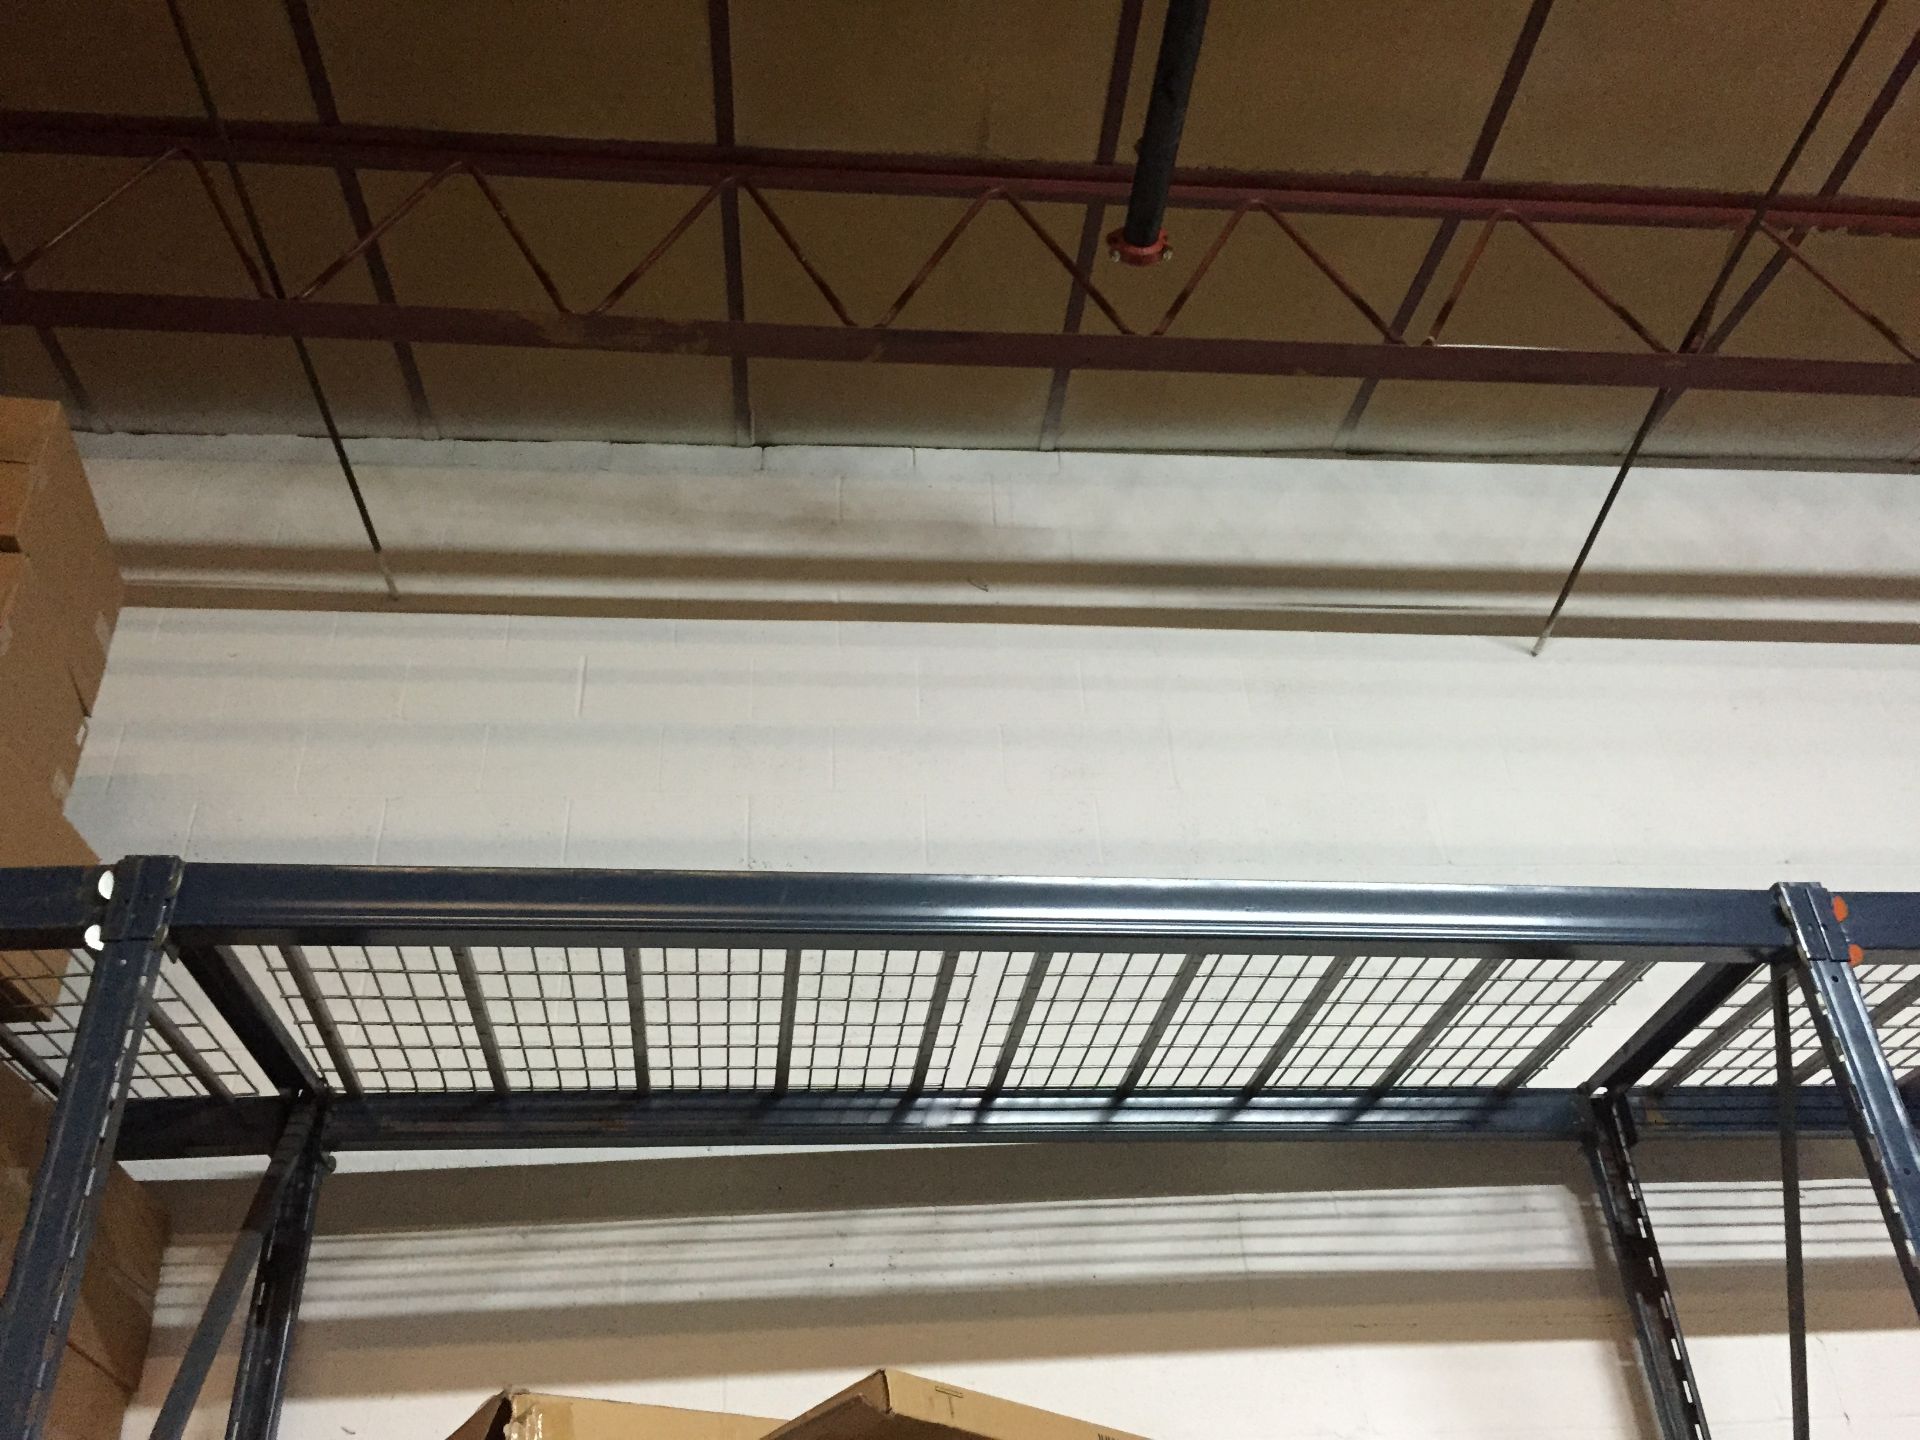 96"H X 36"D X 96"L STOCK ROOM SHELVING, TOTAL 28 SECTIONS WITH 2 BEAM LEVELS EACH,  INCLUDES - Image 10 of 11